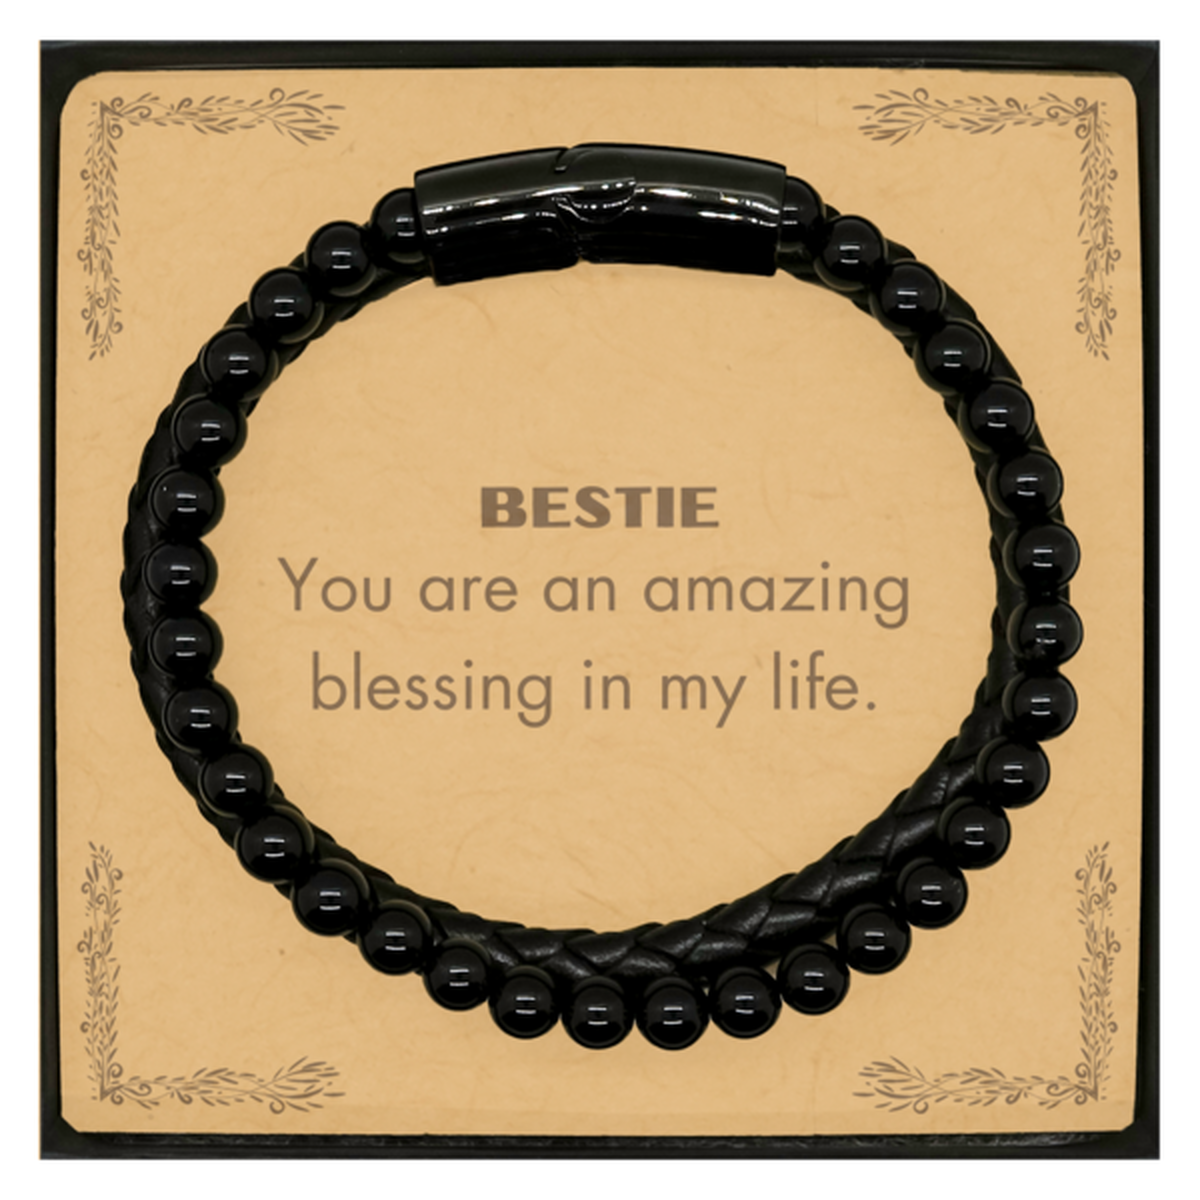 Bestie Stone Leather Bracelets, You are an amazing blessing in my life, Thank You Gifts For Bestie, Inspirational Birthday Christmas Unique Gifts For Bestie